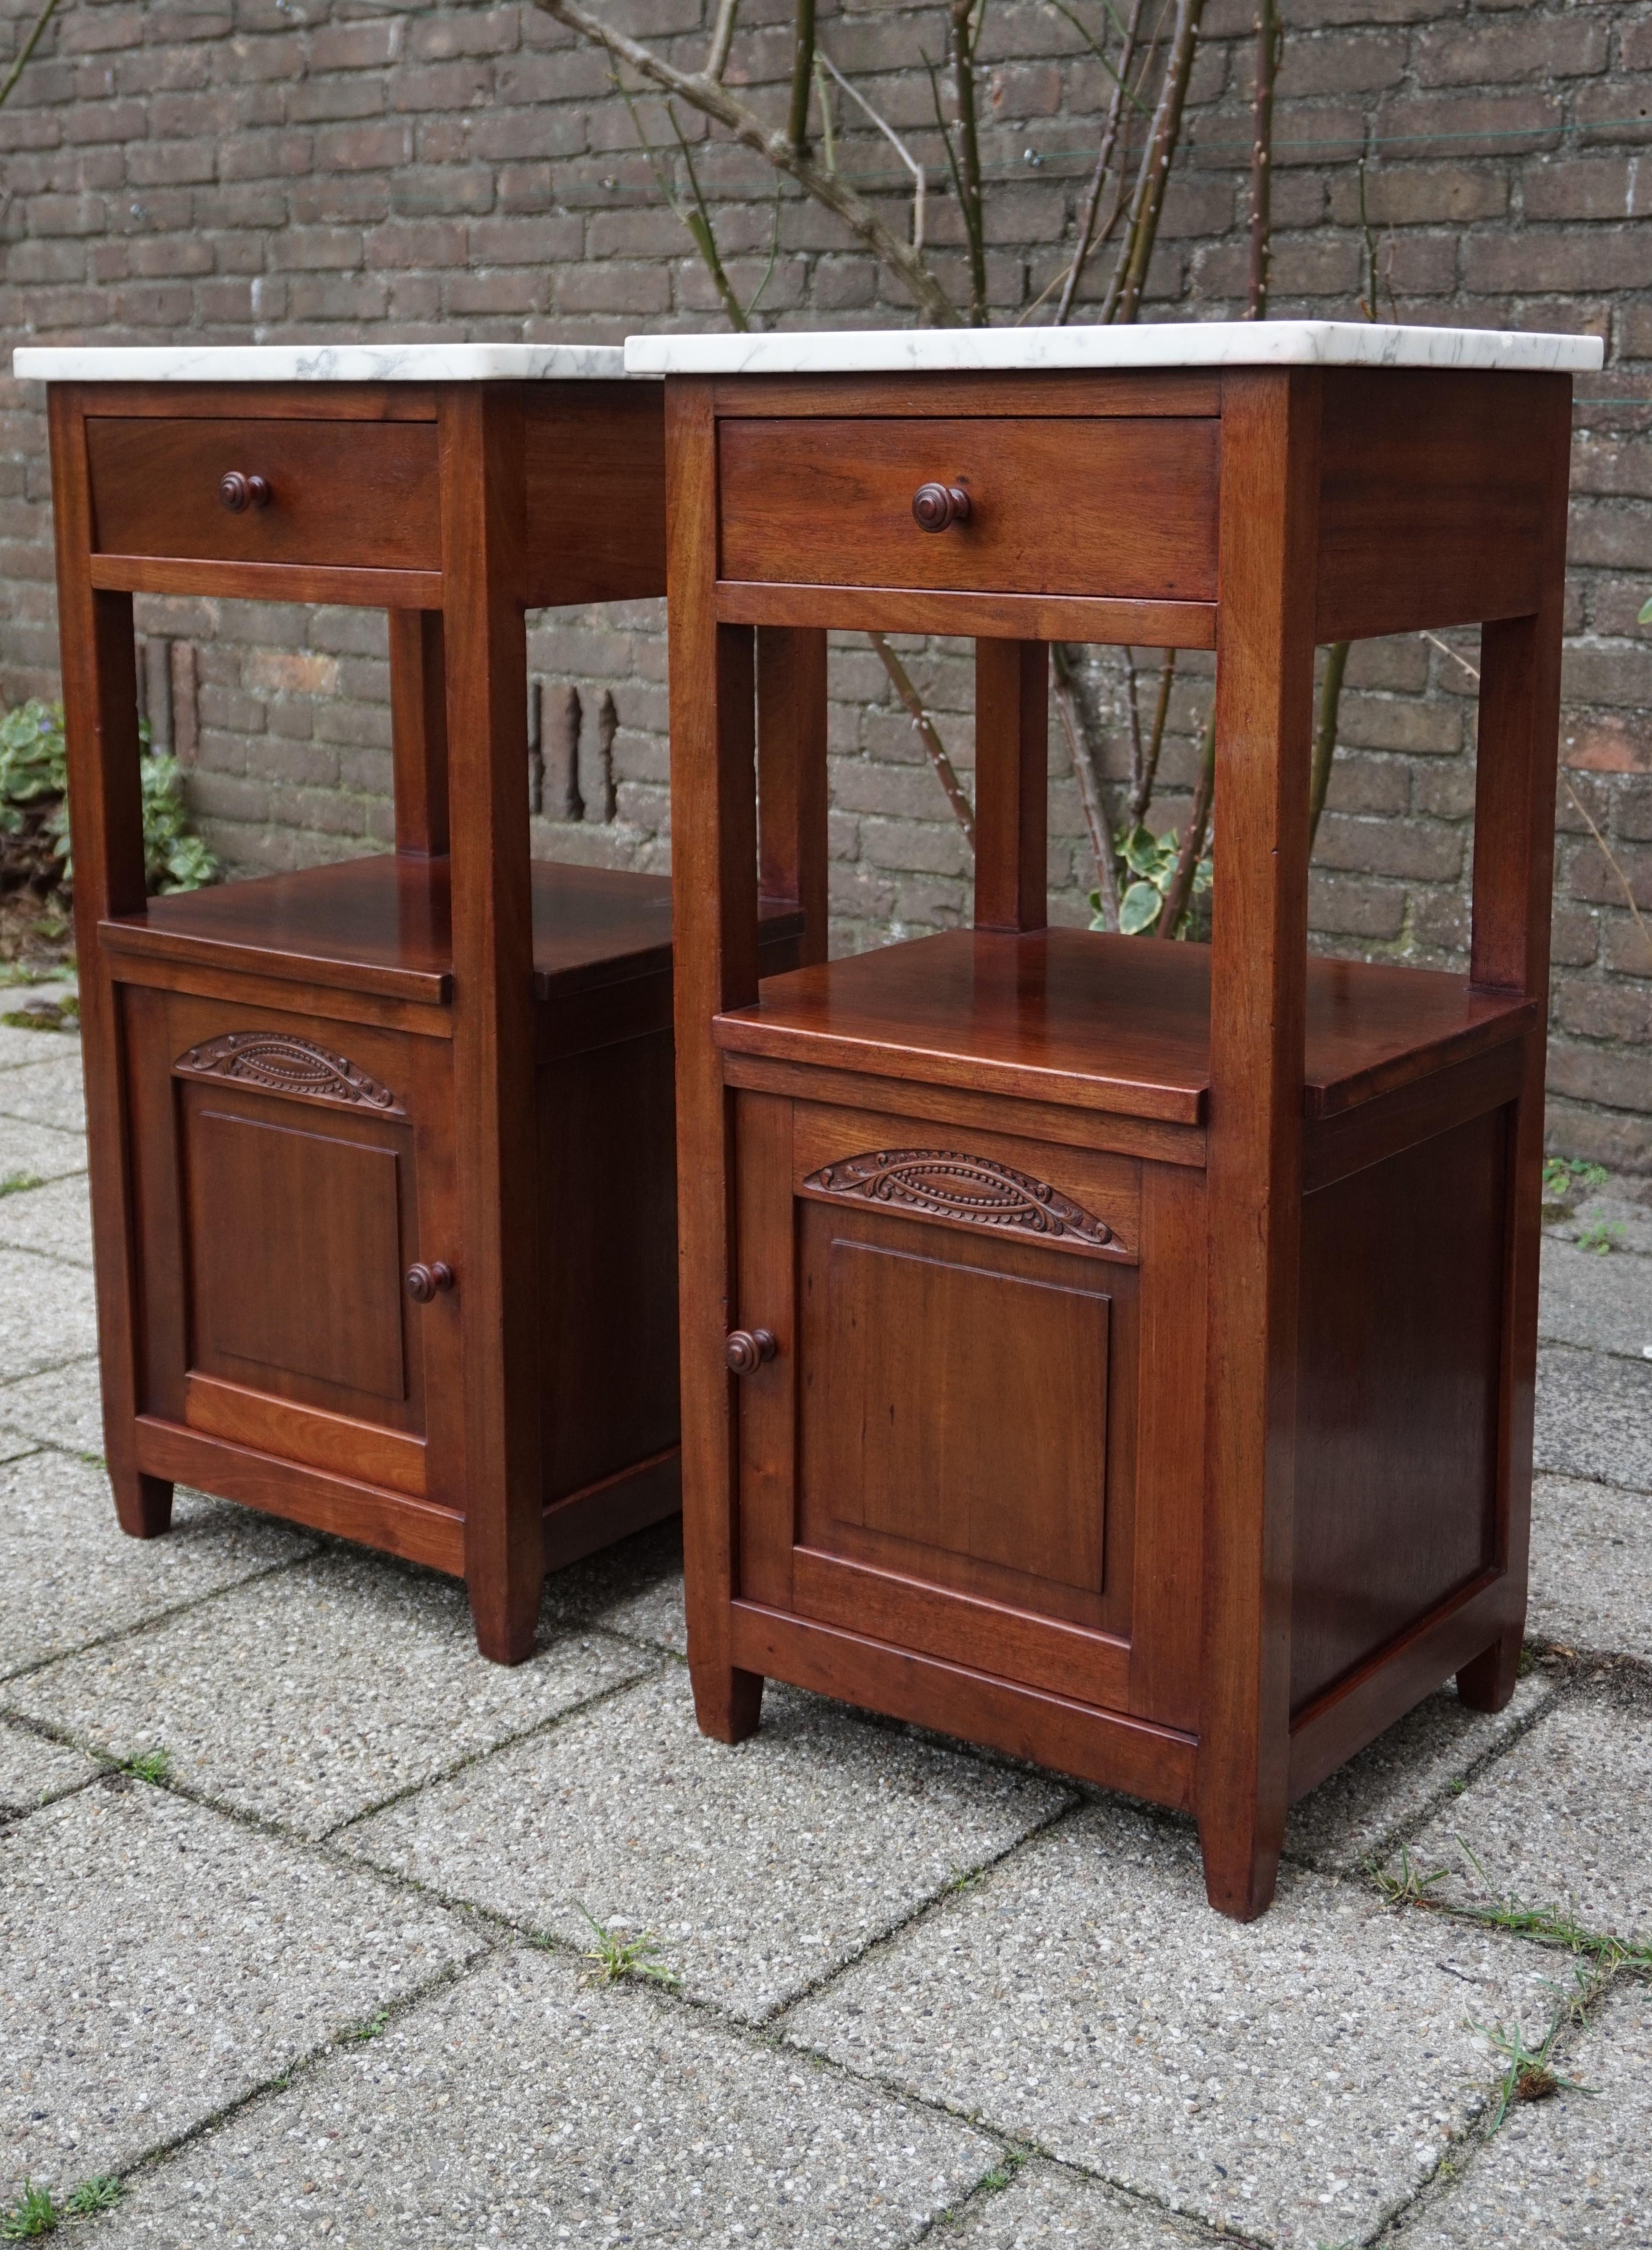 Beautiful and practical nightstands.

Are looking for timeless and beautifully handcrafted bedside cabinets then this Arts and Crafts pair could be perfect for you. They are made of great quality mahogany and combined with the contrasting white